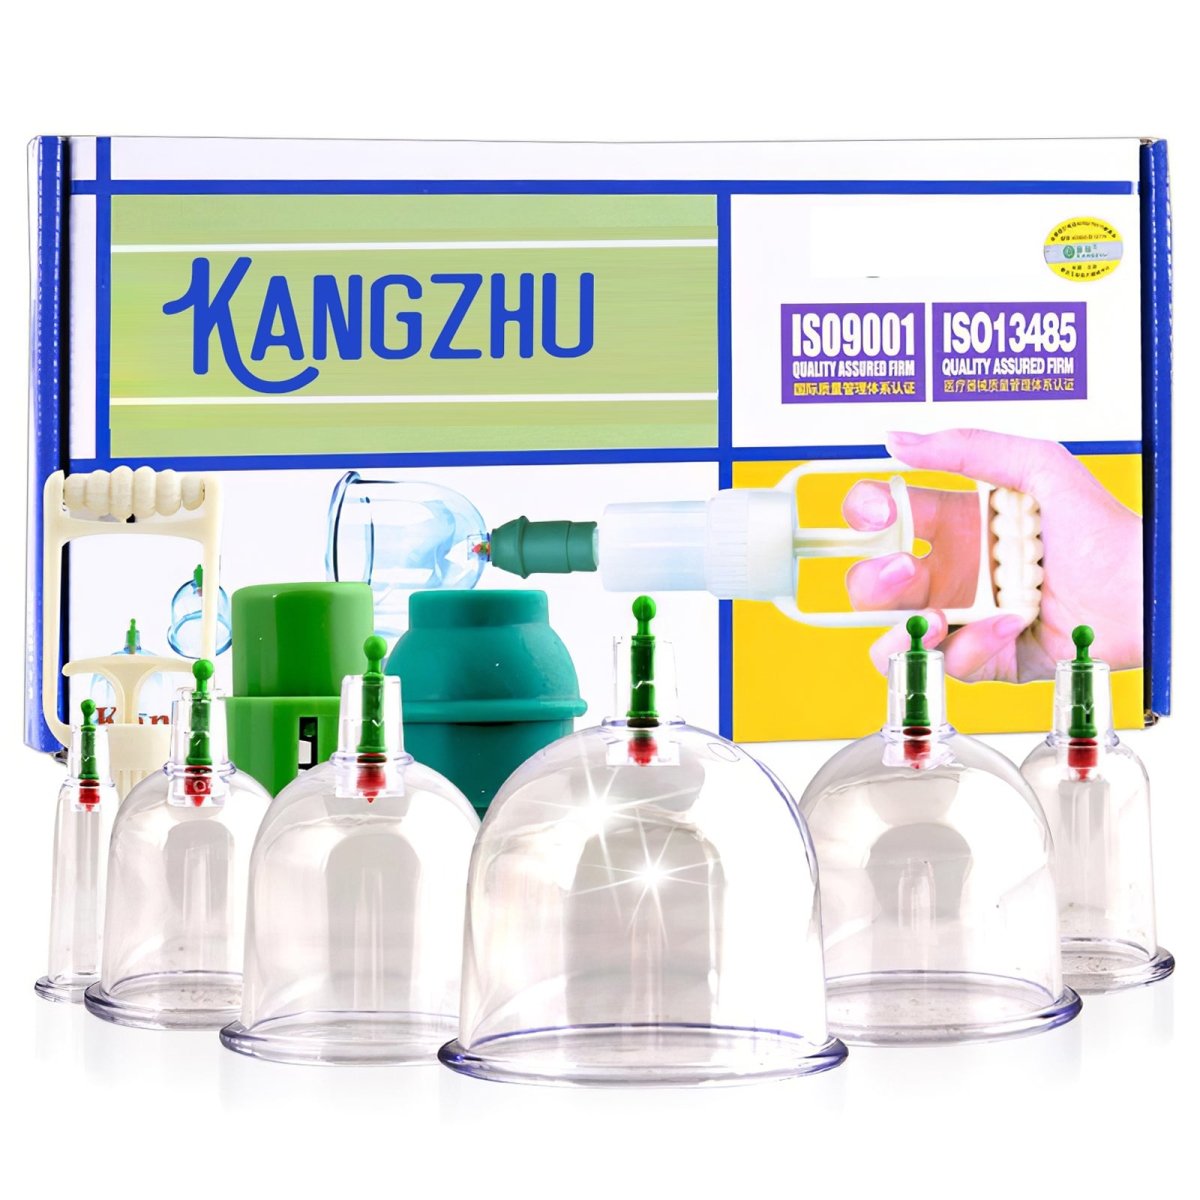 Kang Zhu Vacuum Suction Cupping Therapy Kit - 6 Cups - GreenLife-Massage Supplies